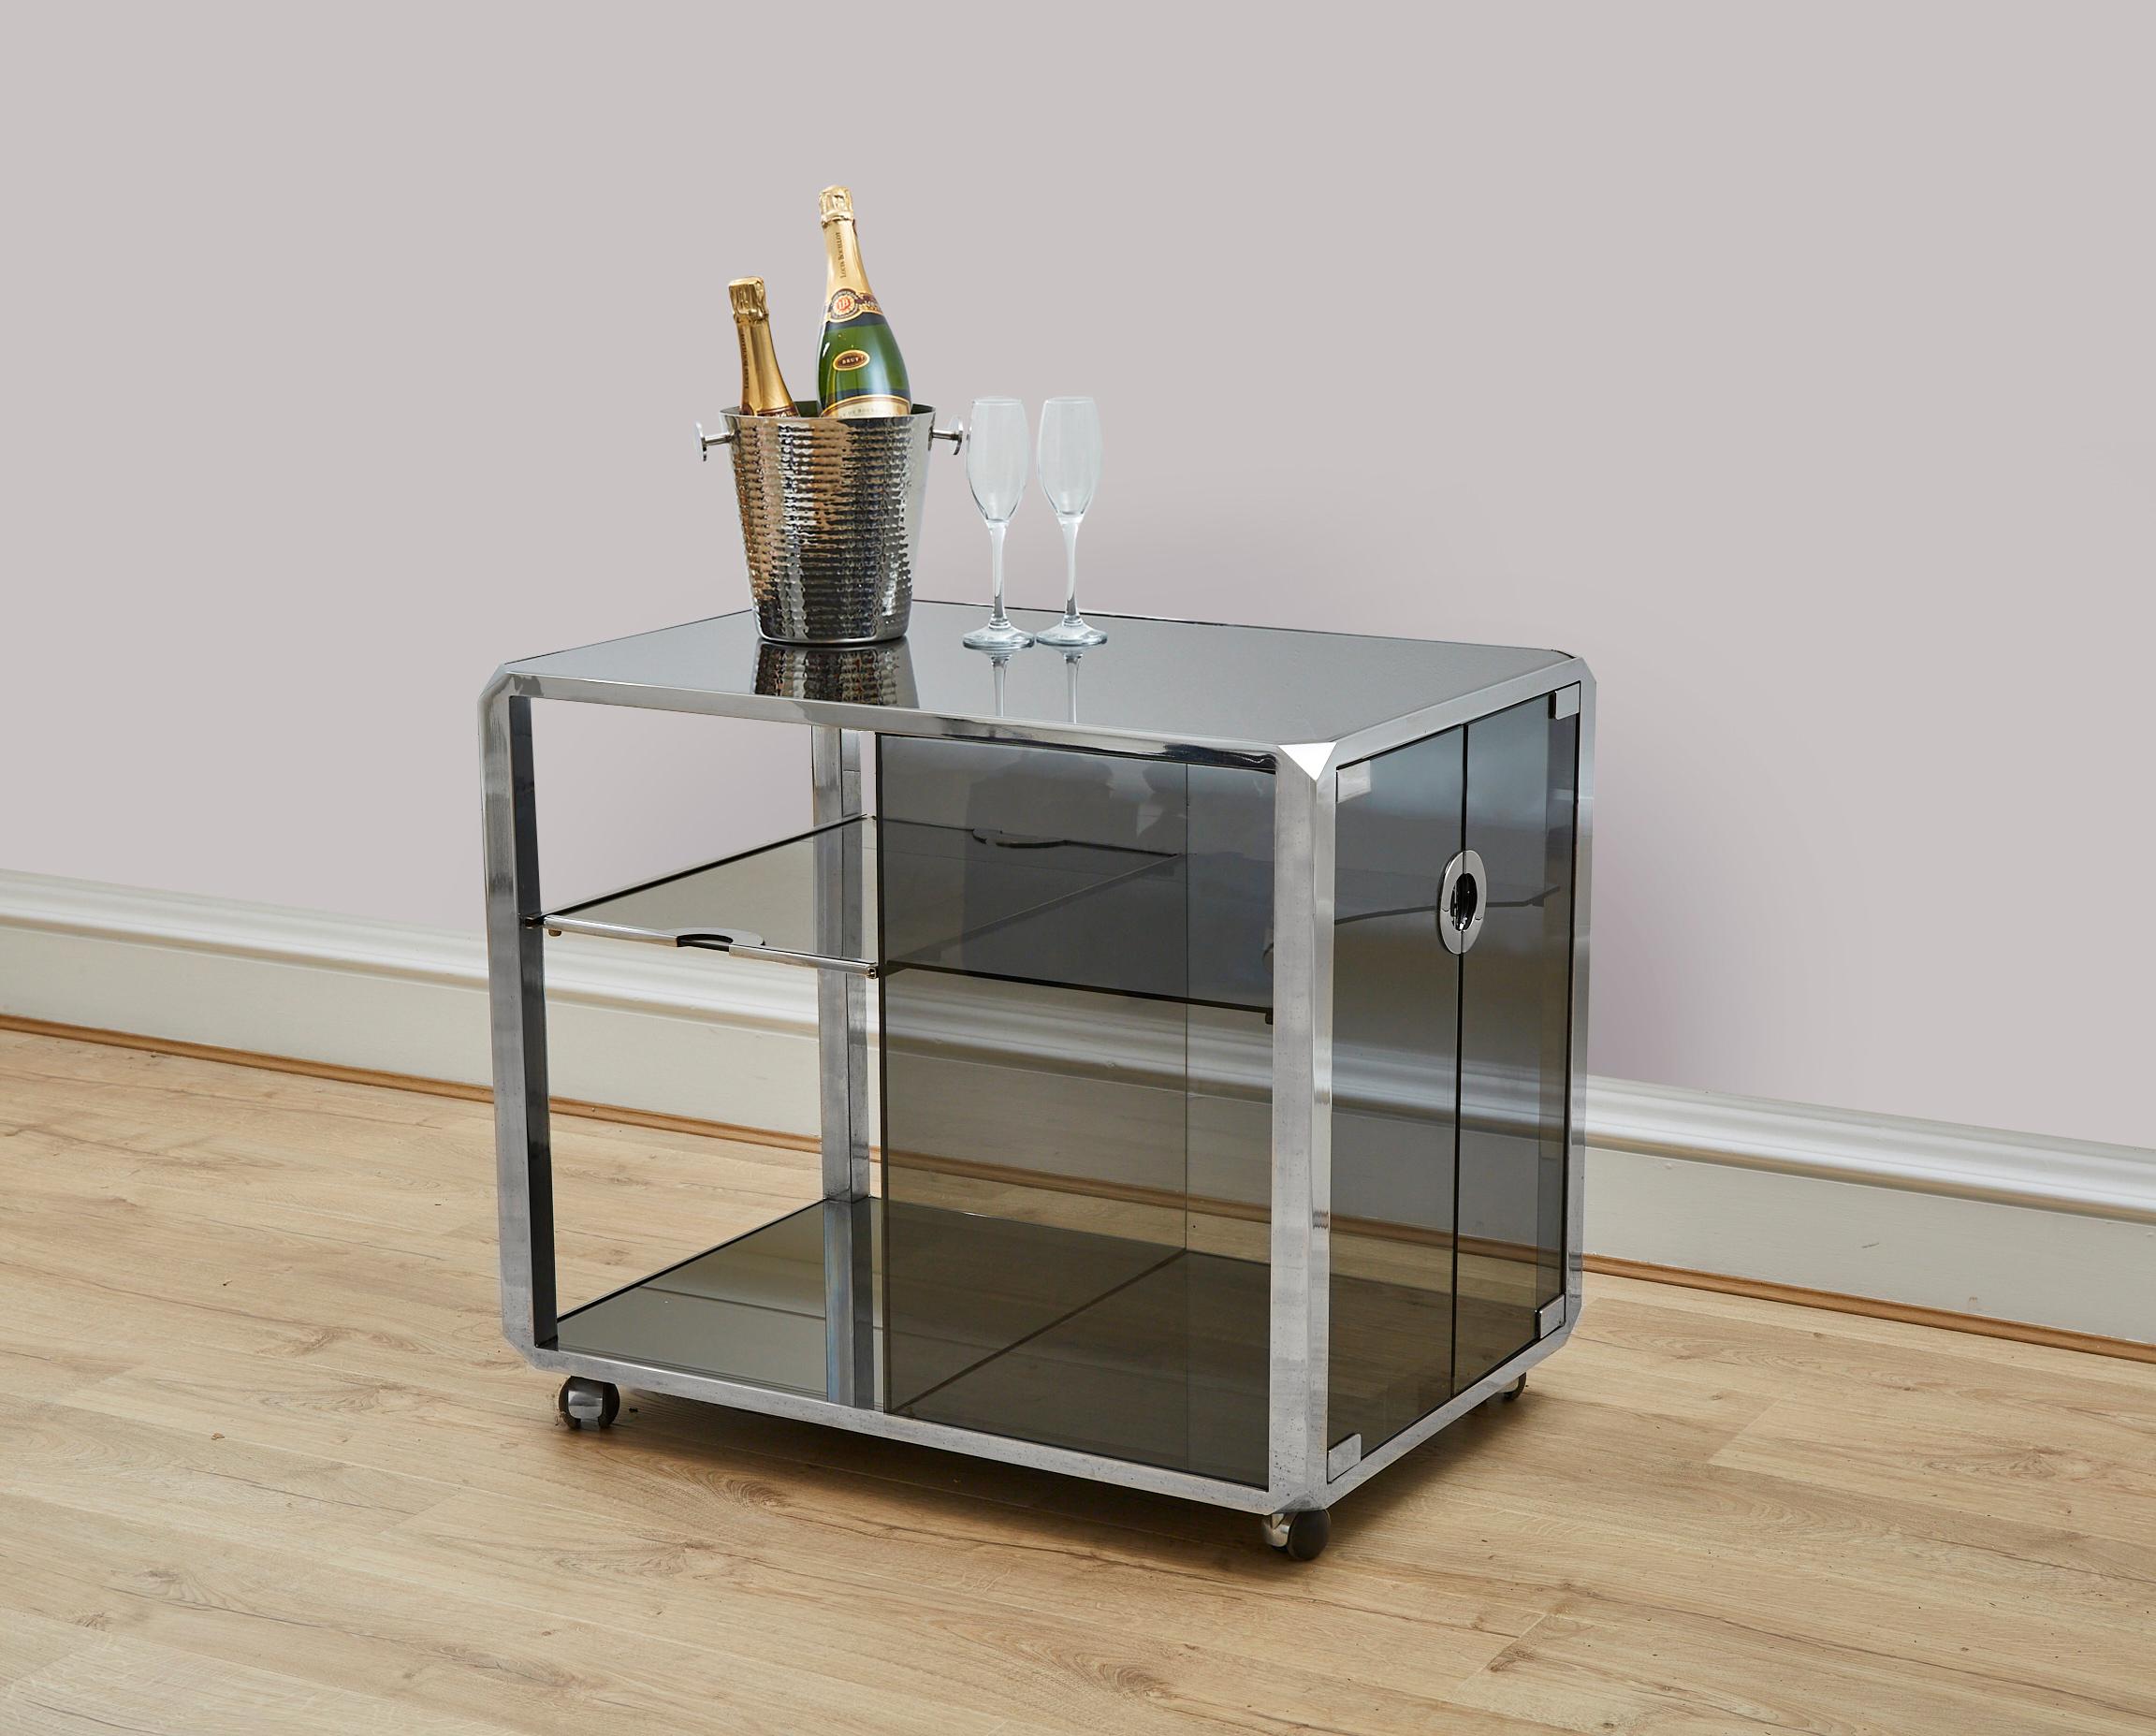 A super stylish mid century modern drinks cart / drinks bar featuring polished chrome and smoked glass.
This bar was produced in the 1970's and designed by Renowned Italian furniture designer Willy Rizzo who is celebrated for having produced